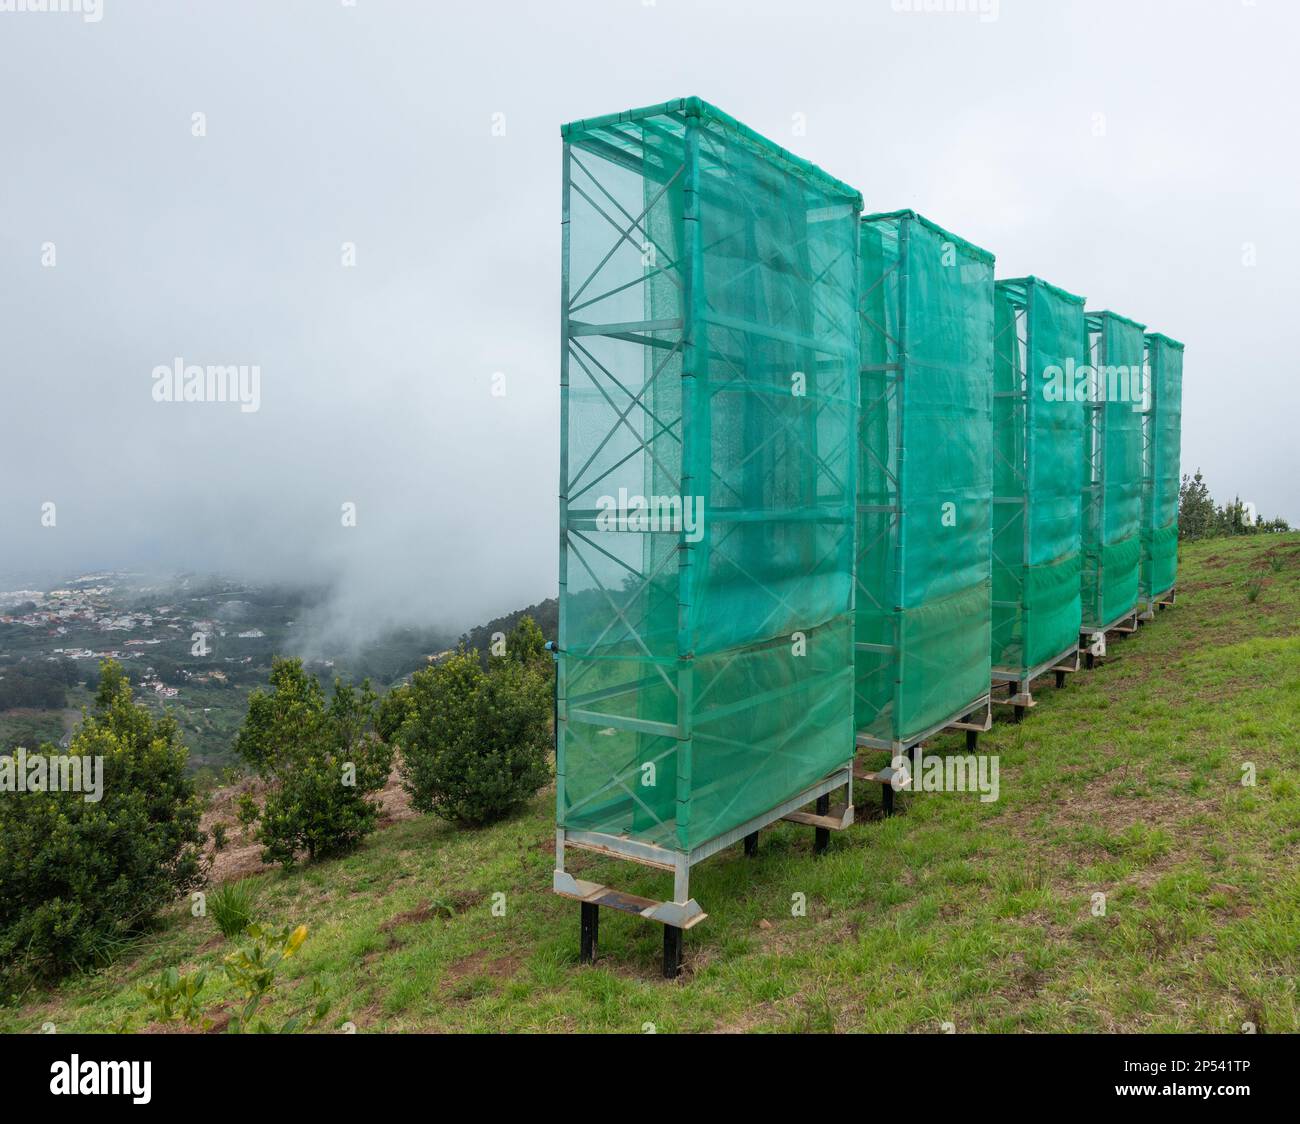 Cloud harvesting, fog catching nets, netting used to collect water from low clouds/mist/fog in mountains on Gran Canaria, Canary Islands, Spain Stock Photo